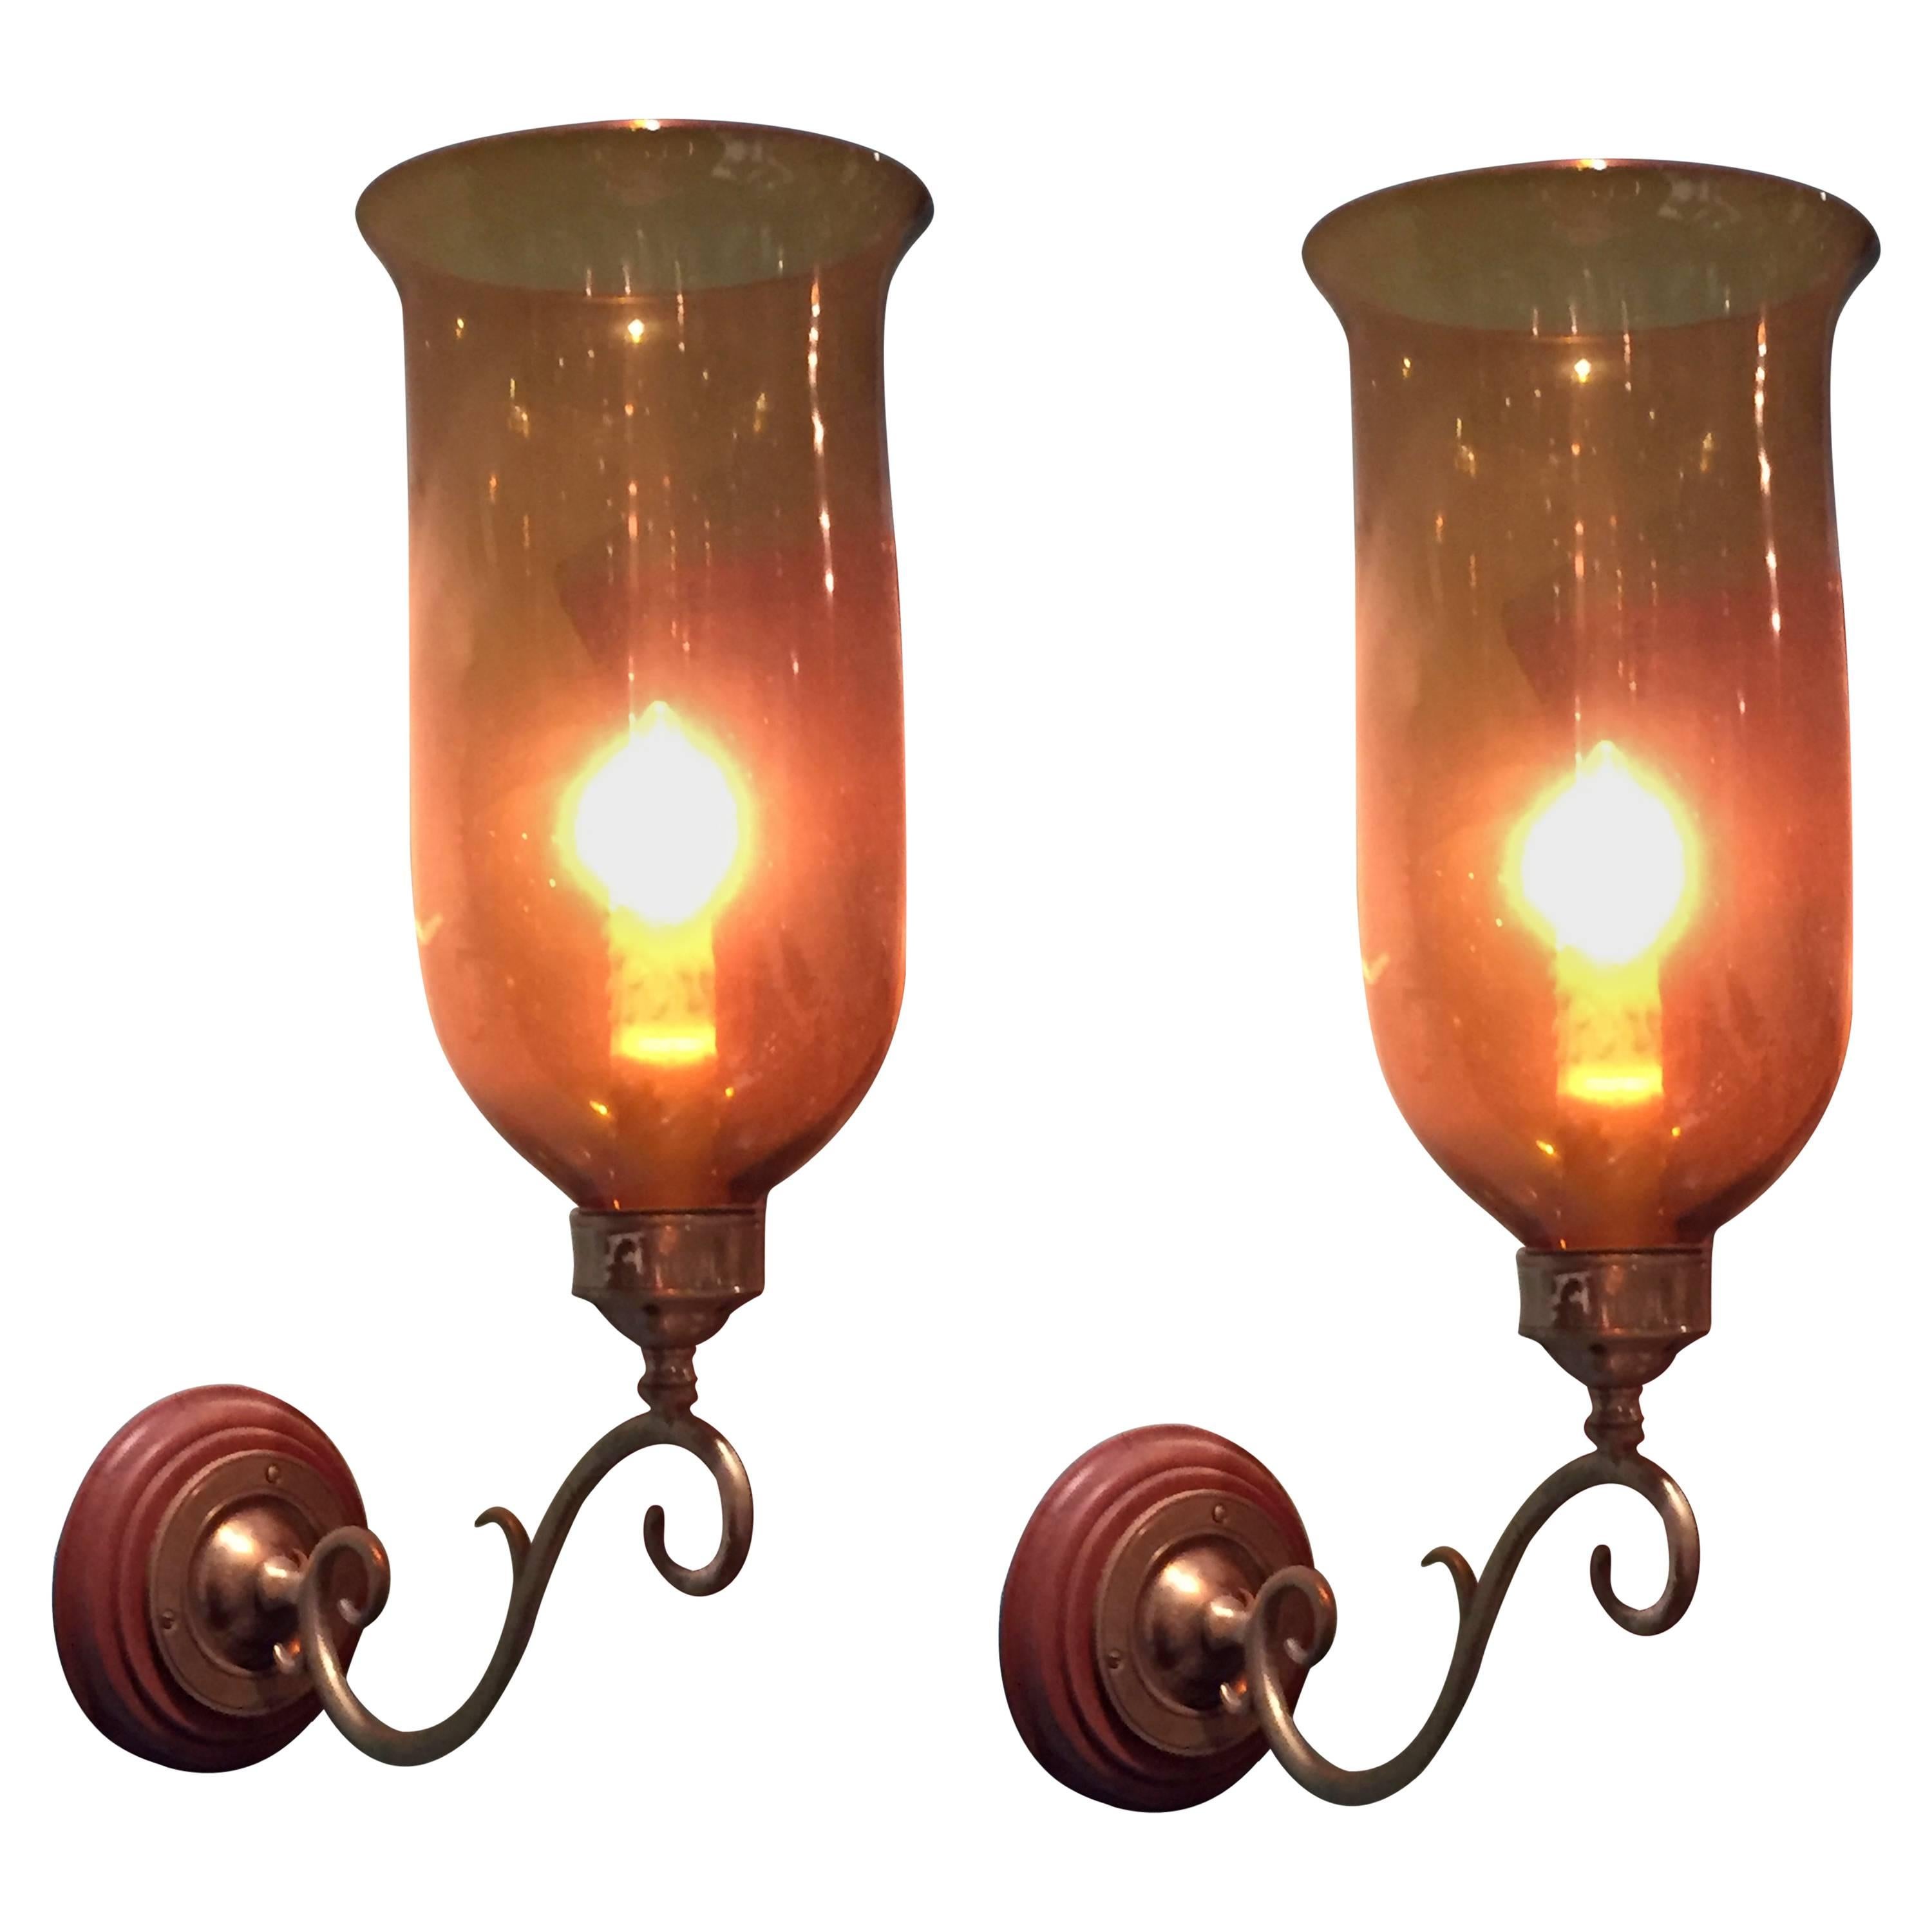 Pair of Hurricane Shade Sconces with Amber Glass